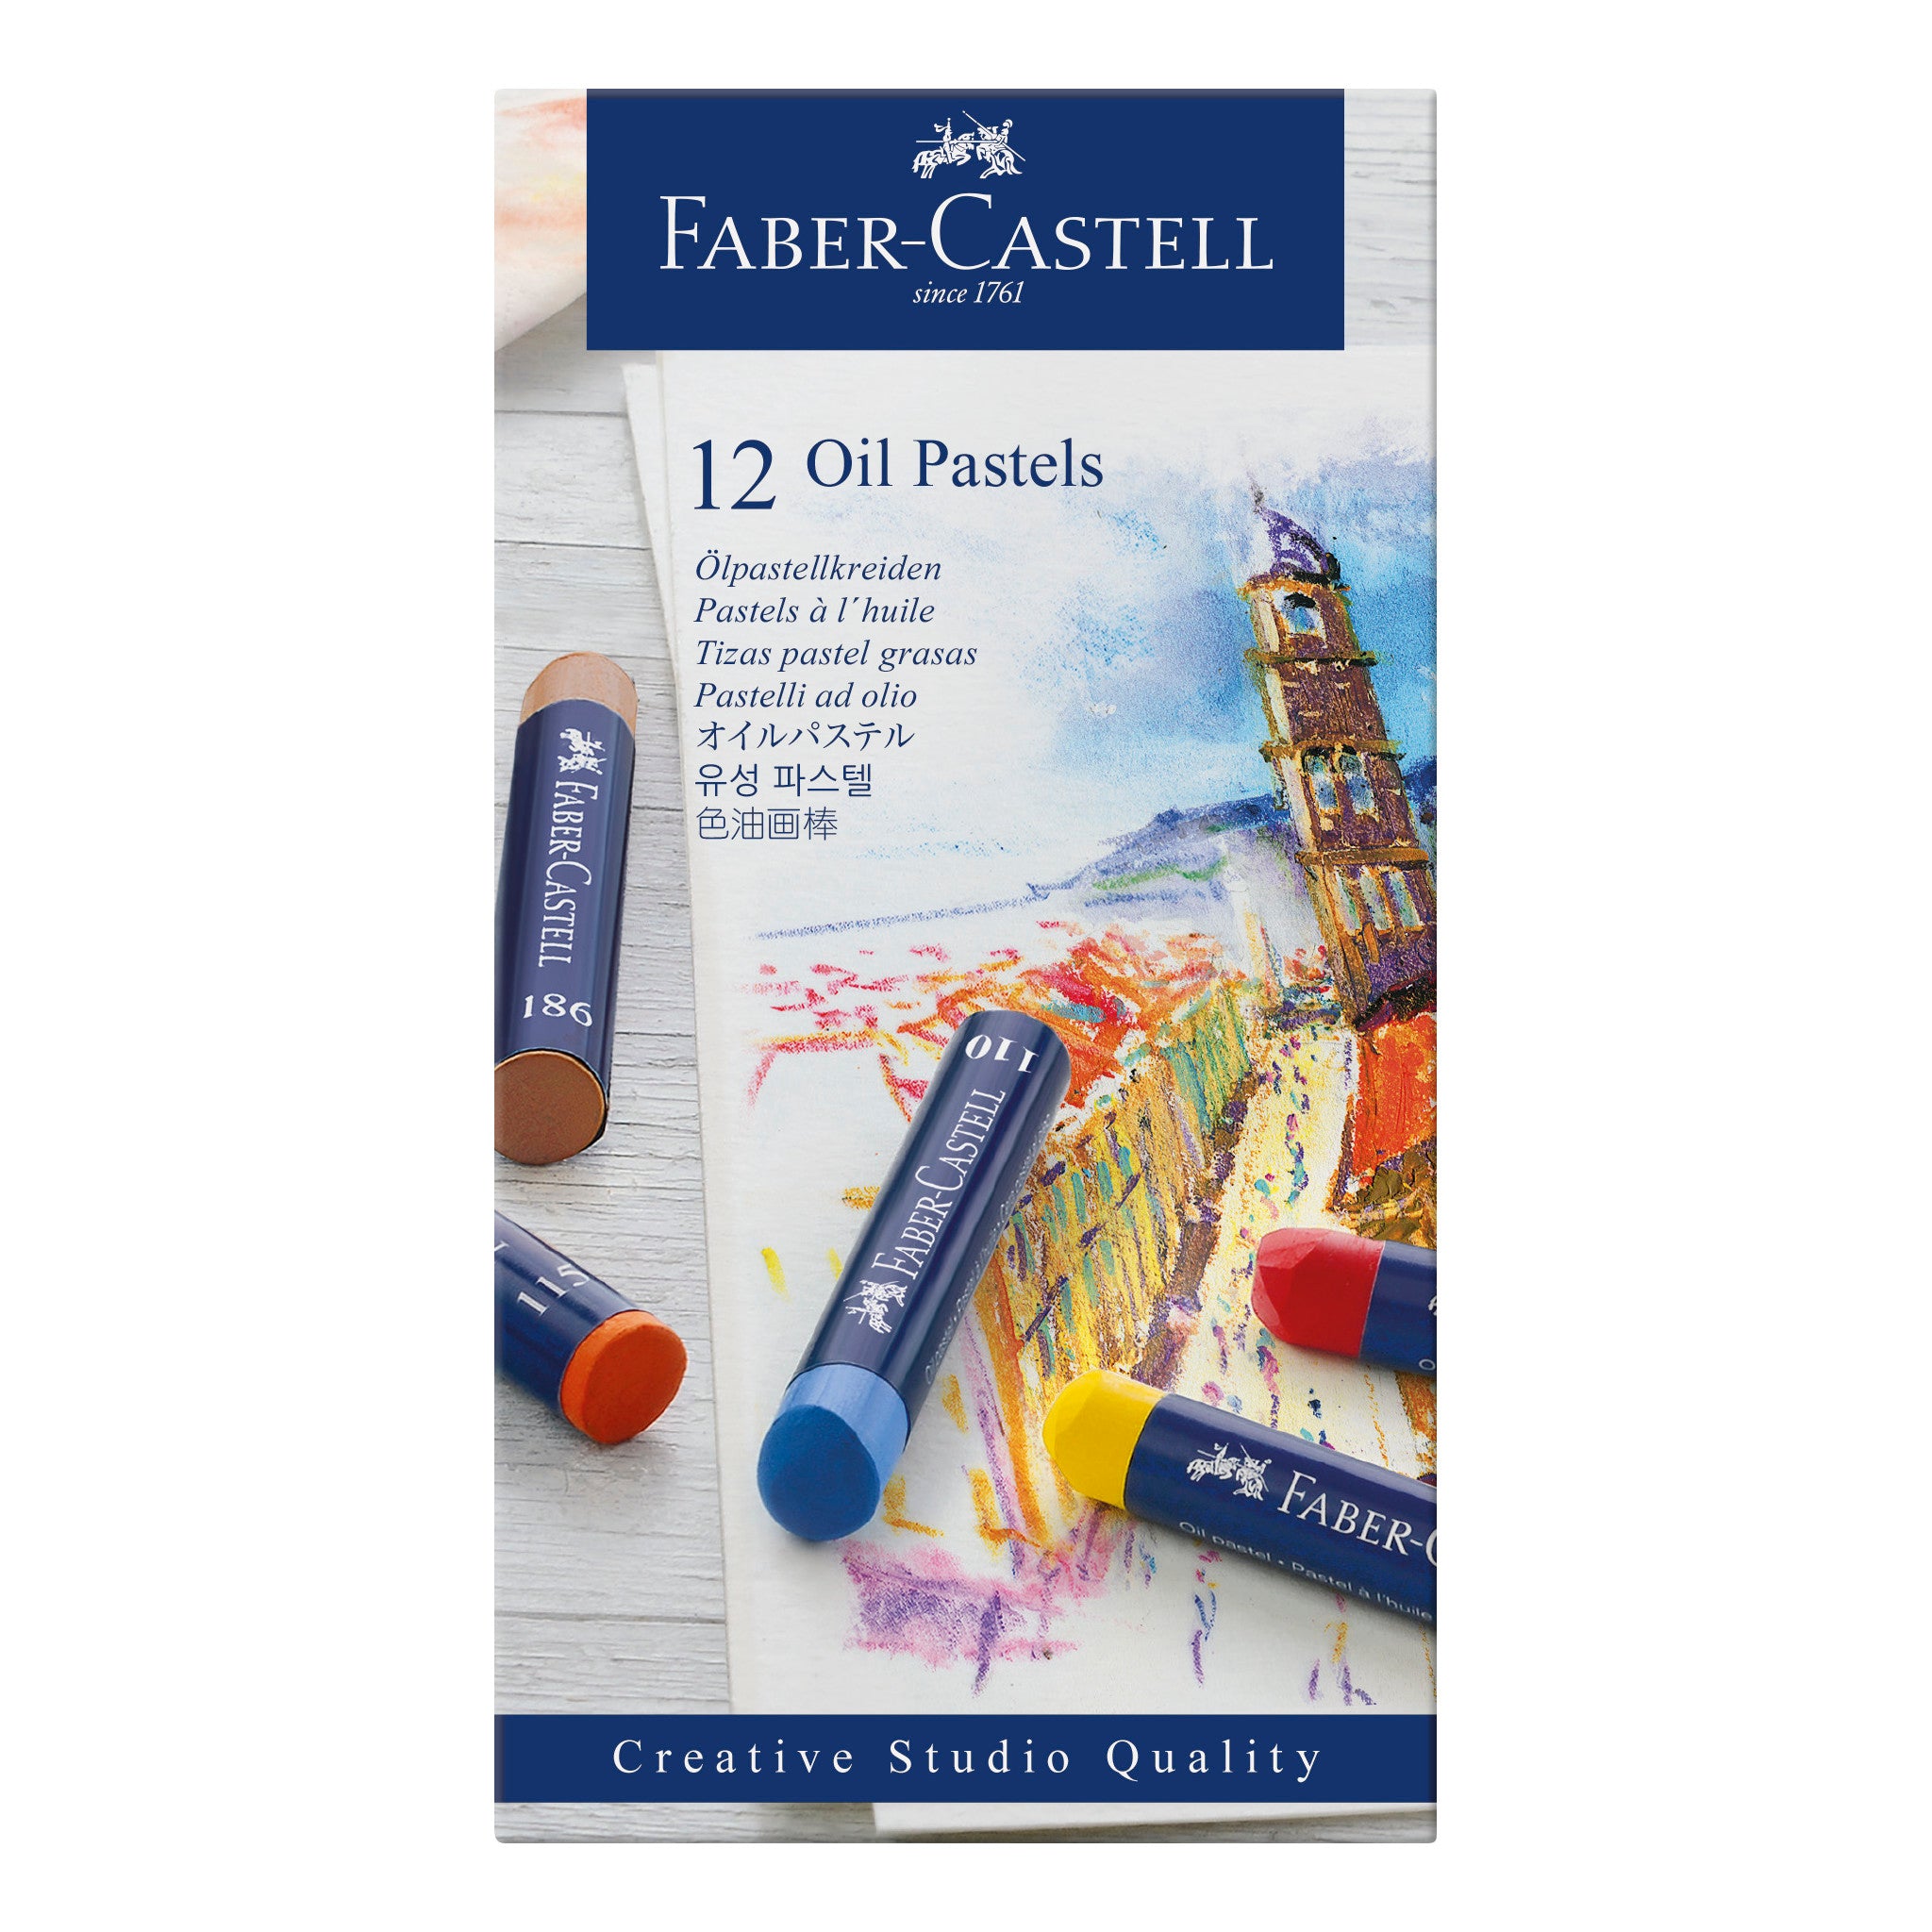 Faber-Castell Oil Pastels School Pack (24 Each of 12 Colors) - 288 Count 